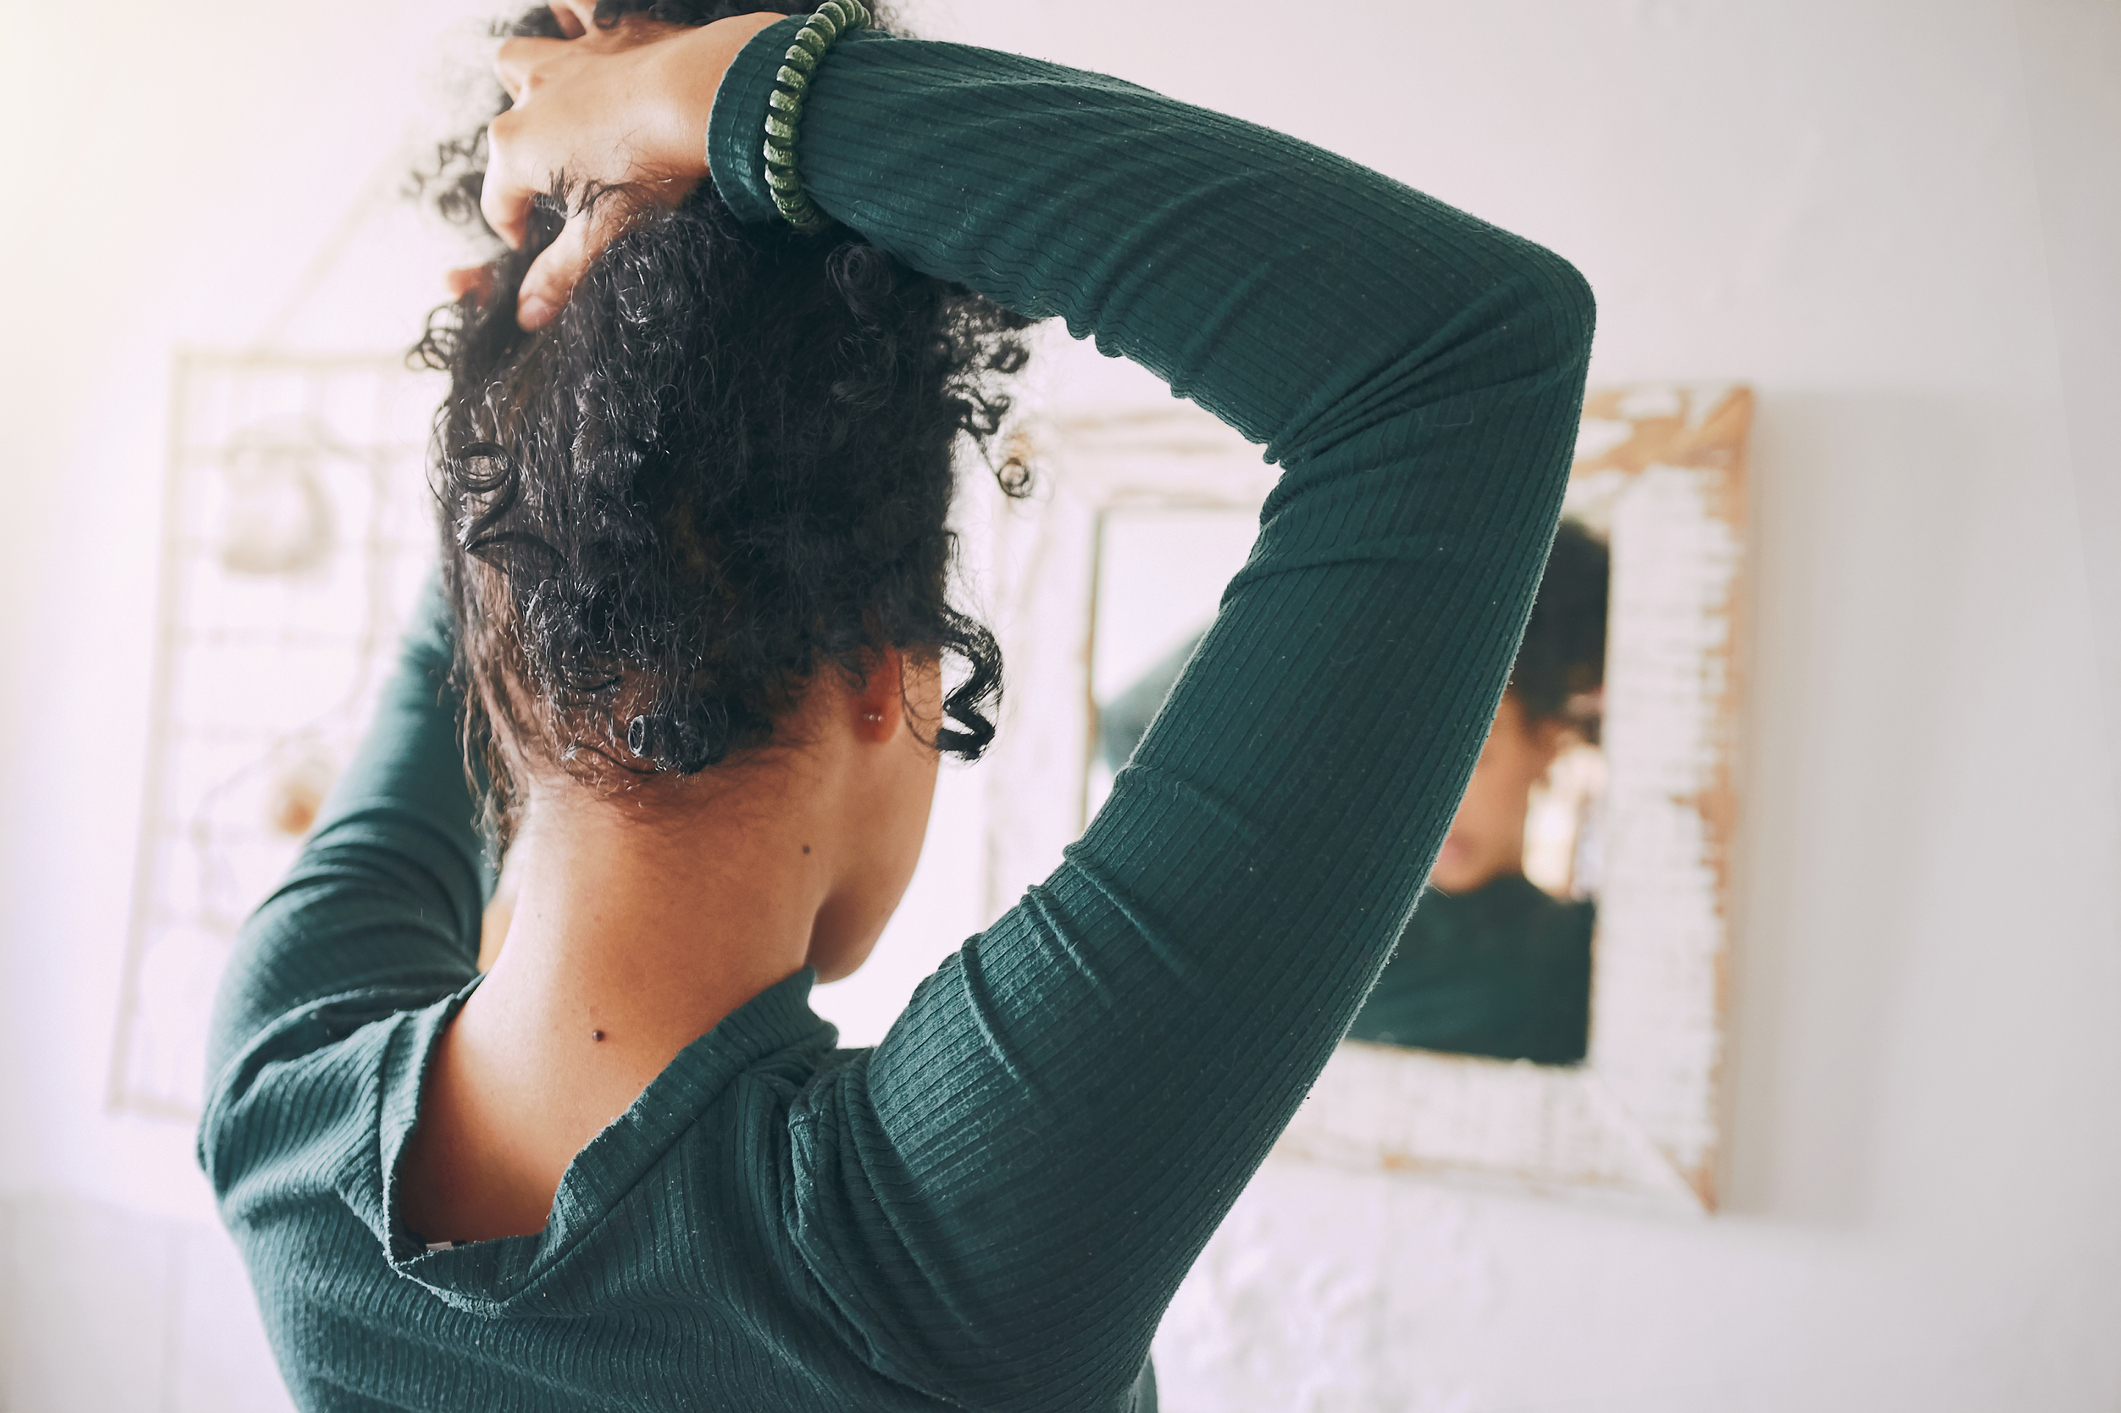 Rearview shot of a young Black woman tying her hair in the bathroom at home